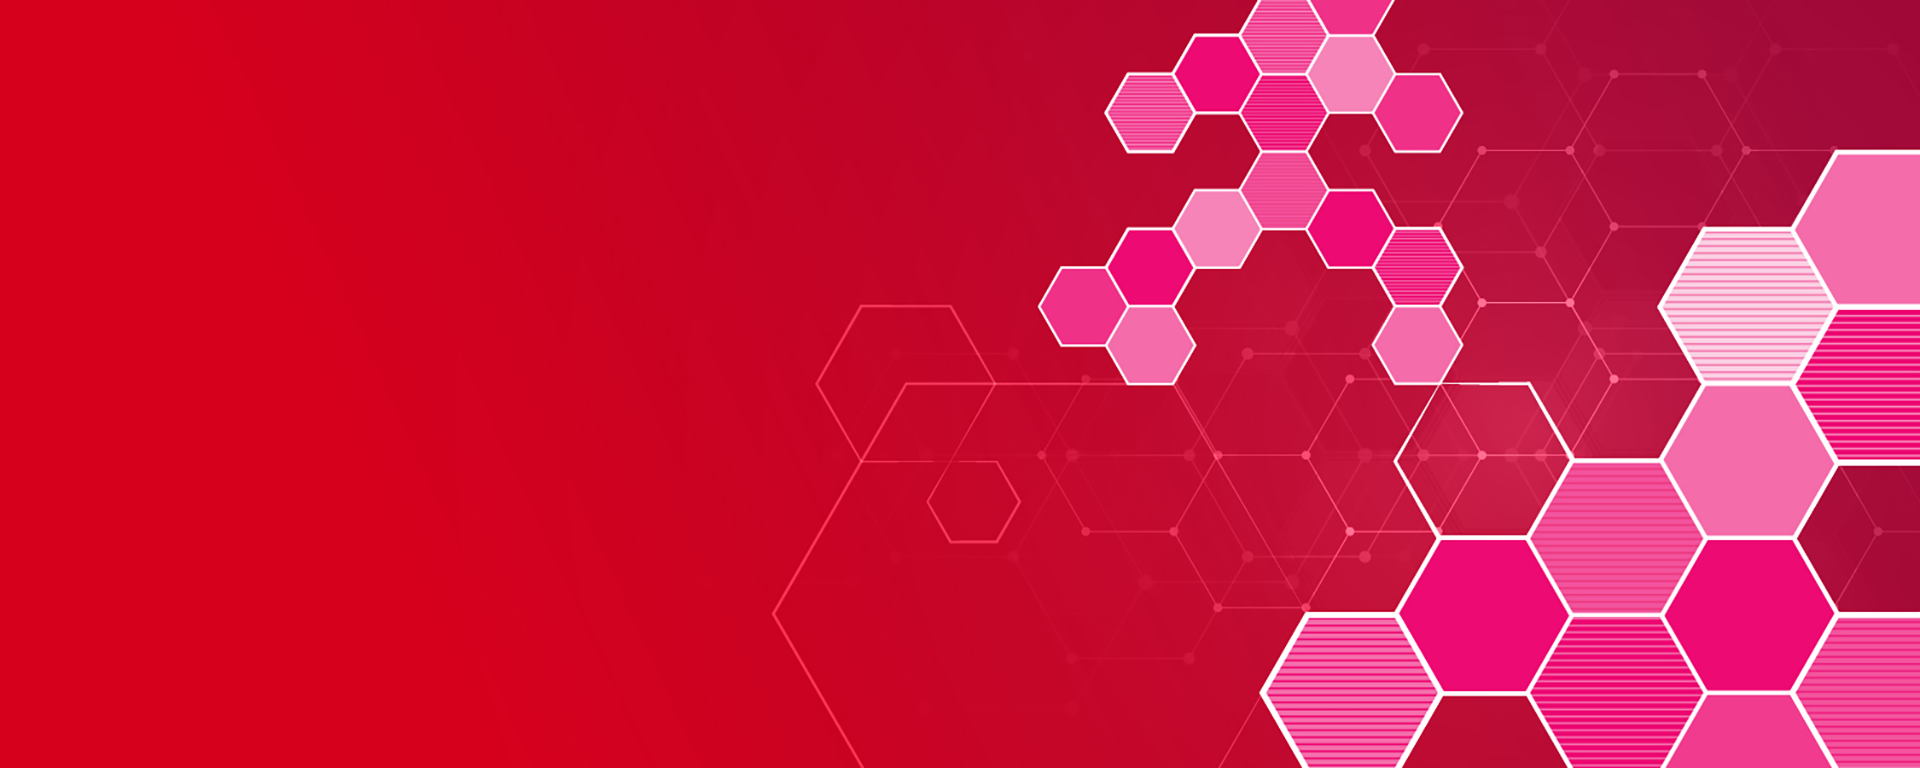 A red background with pink coloured, and outlines of hexagons